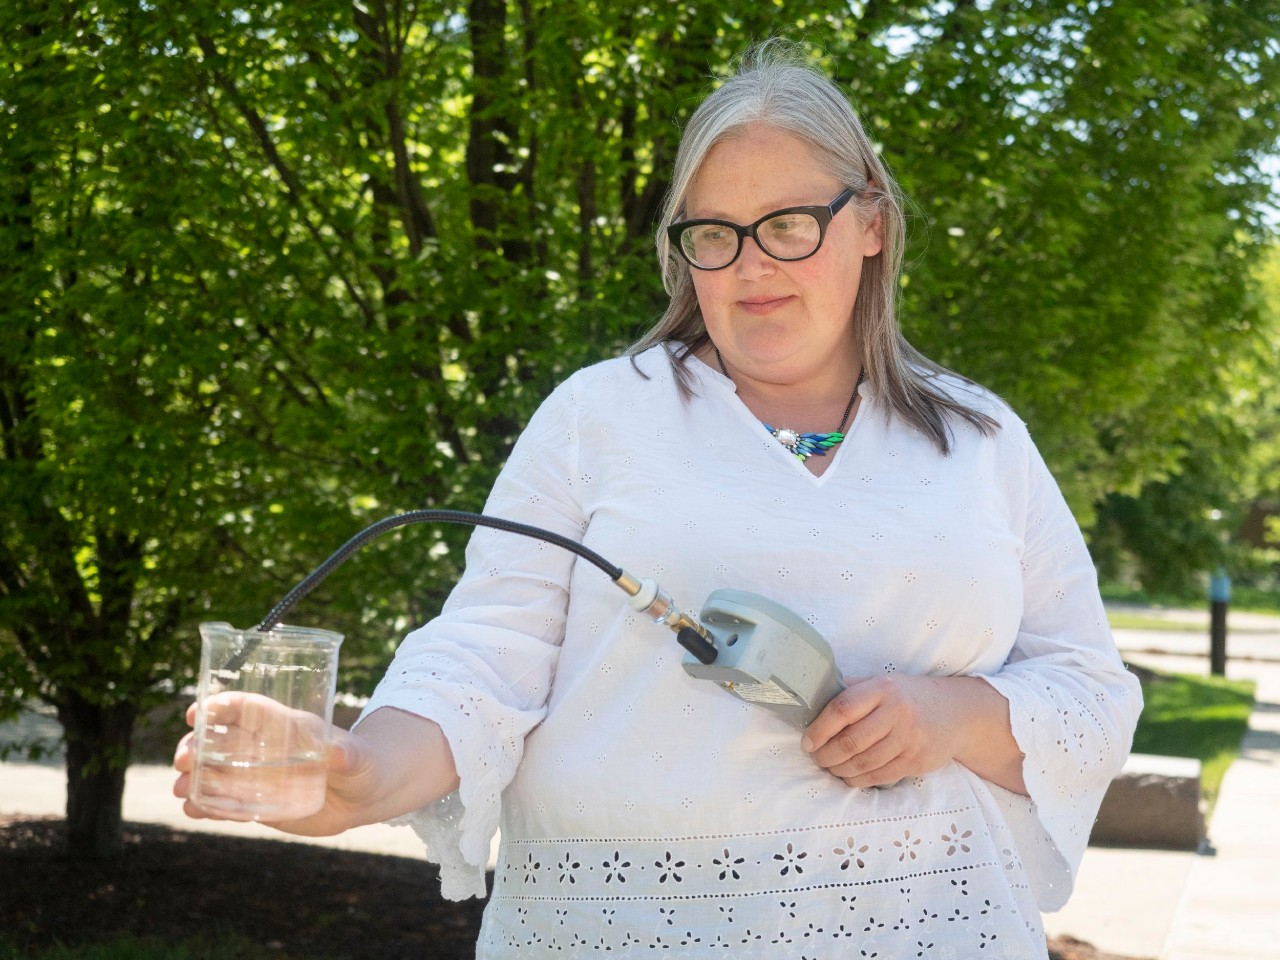 UC associate professor Amy Townsend-Small samples methane in a beaker of water.